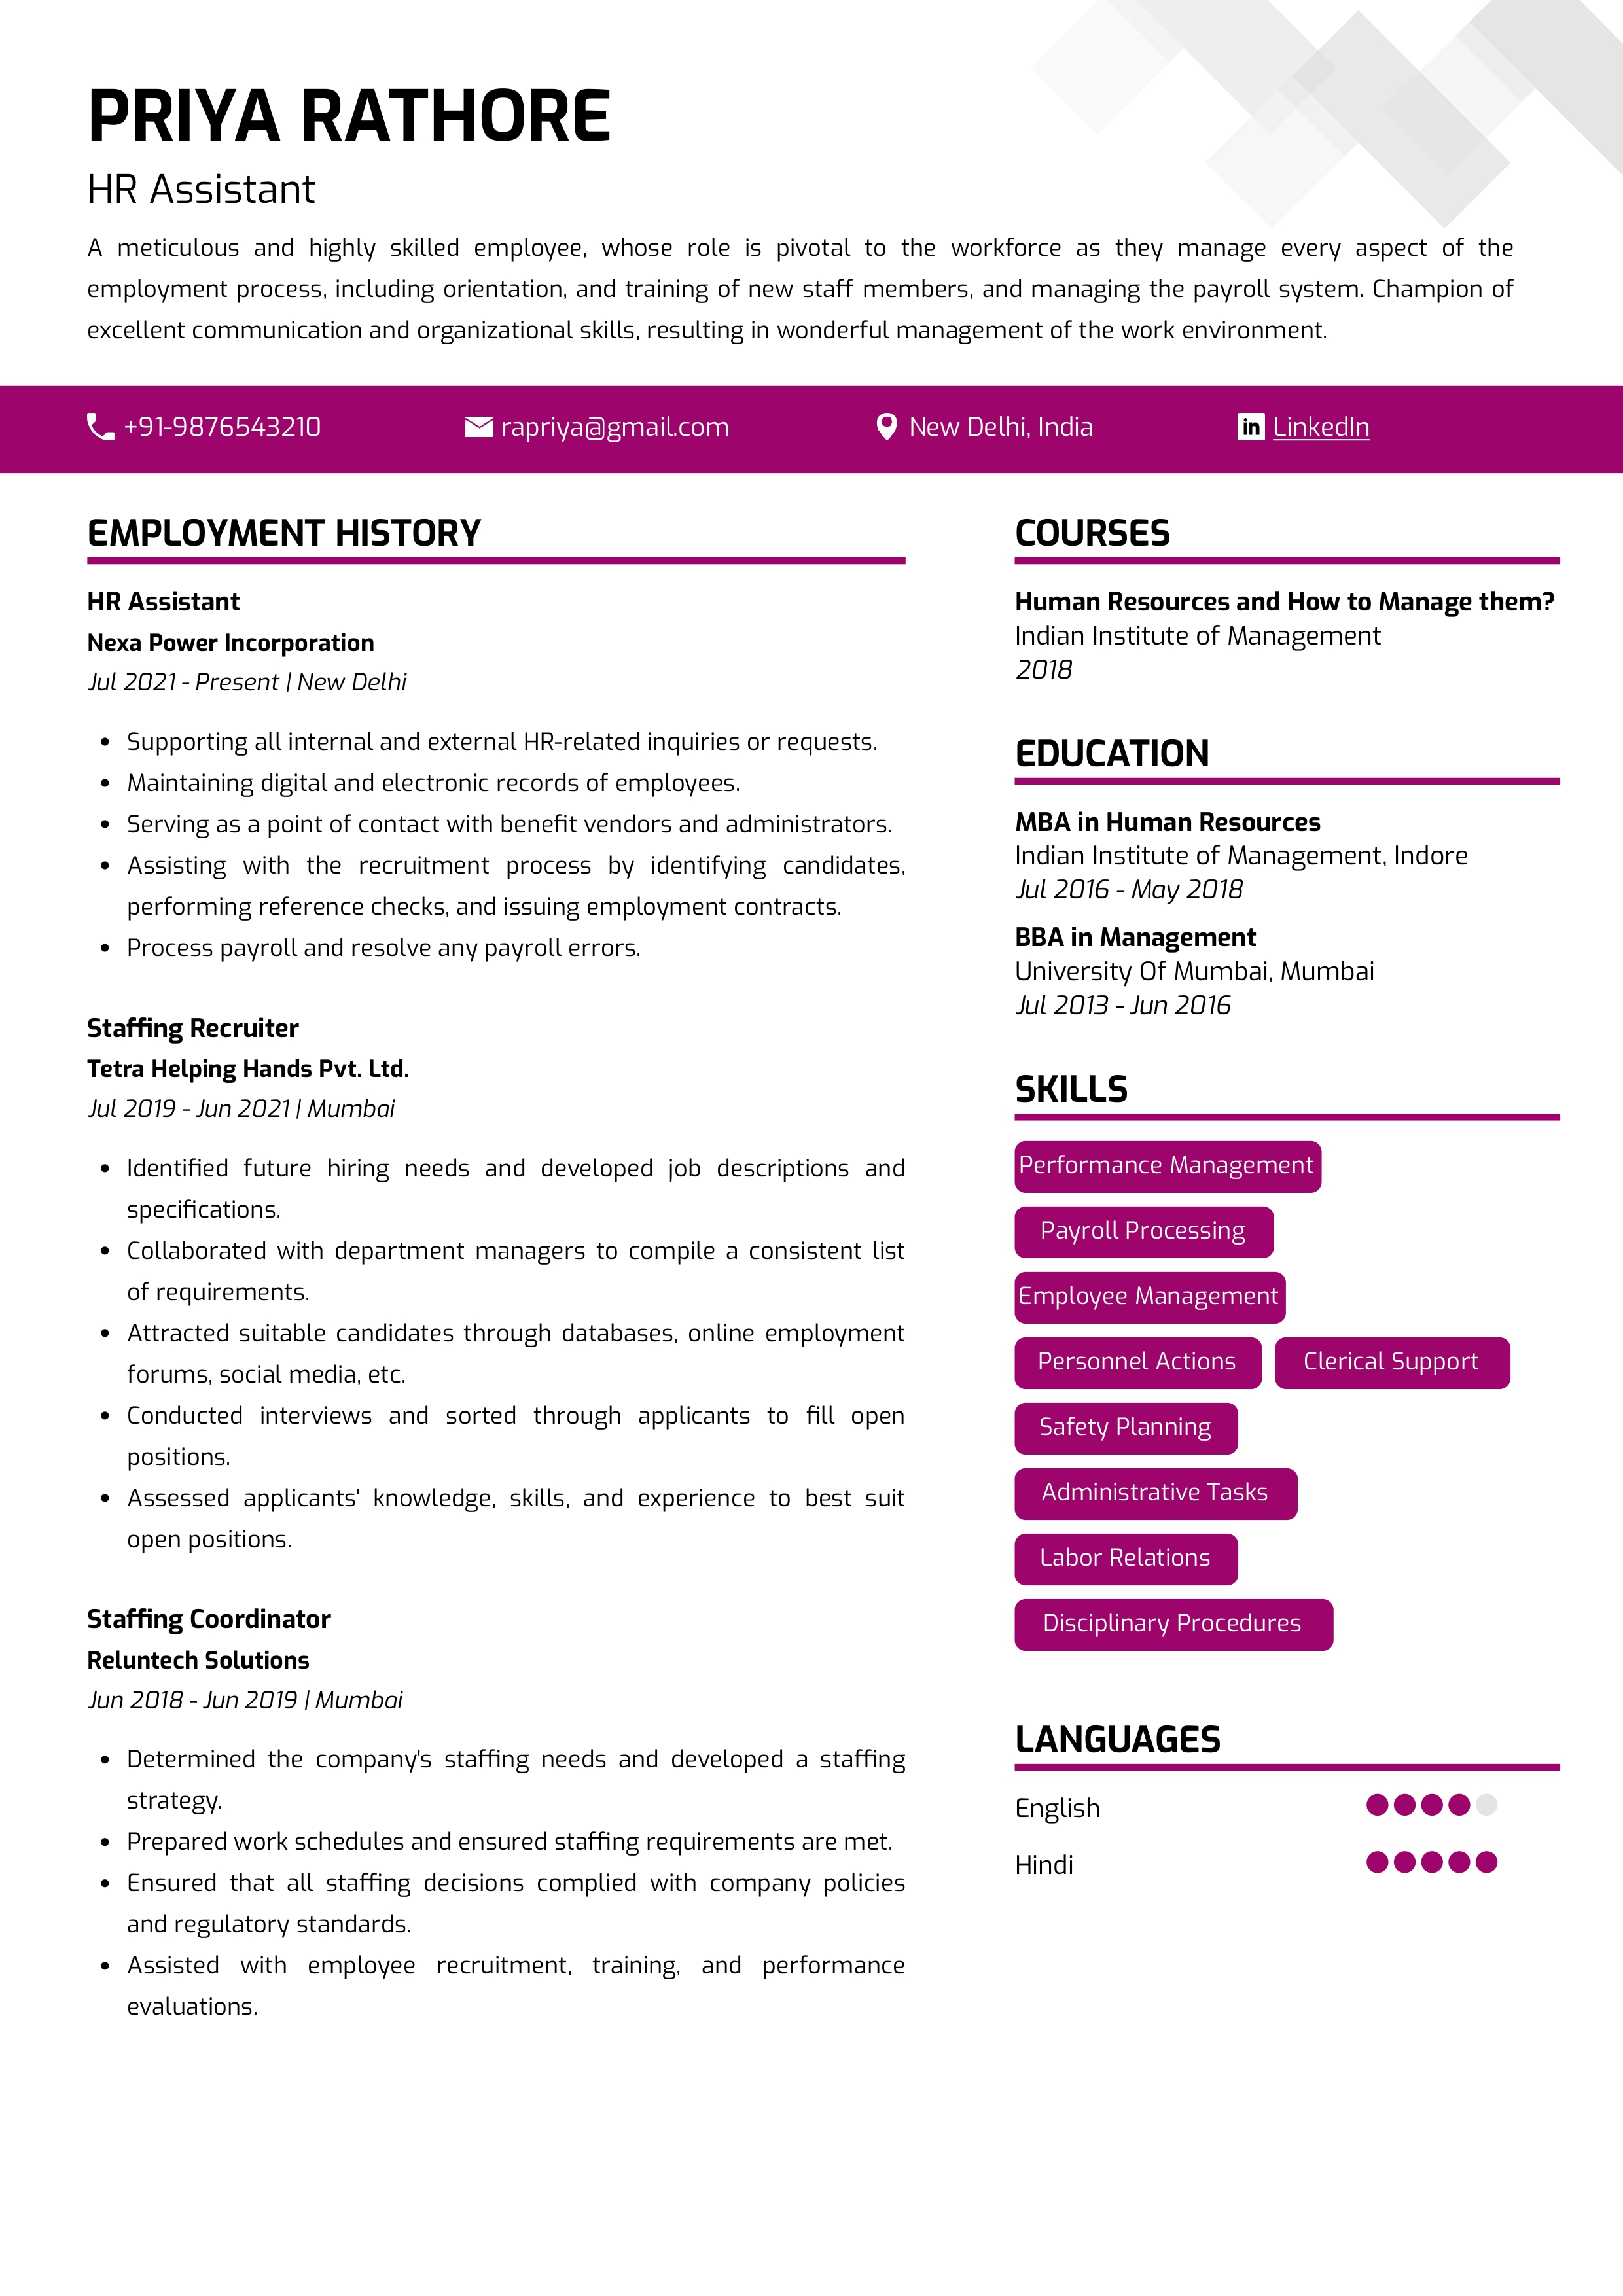 Sample Resume of HR Assistant | Free Resume Templates & Samples on Resumod.co